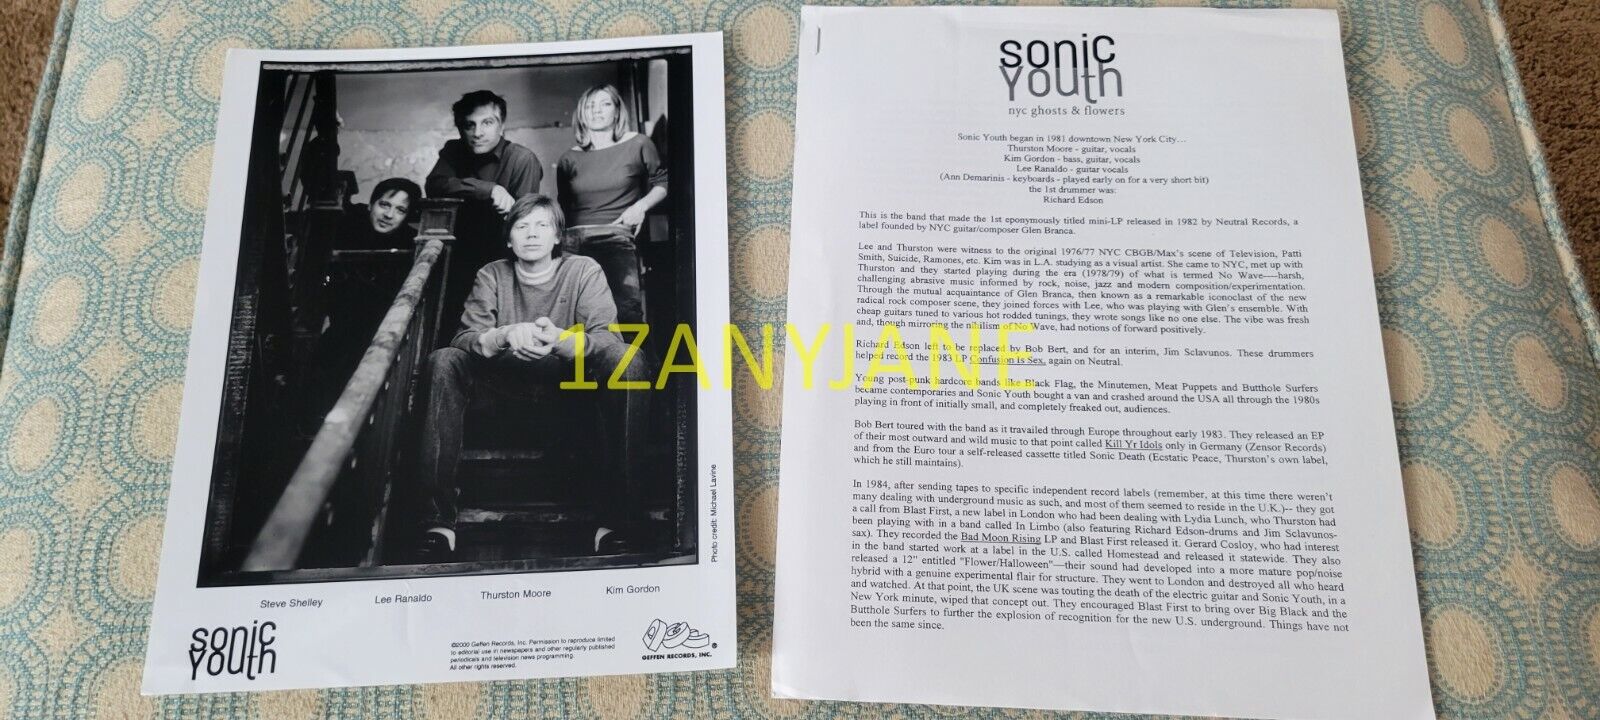 RC2032 Band 8x10 Press Photo PROMO MEDIA, SONIC YOUTH, GEFFEN RECORDS